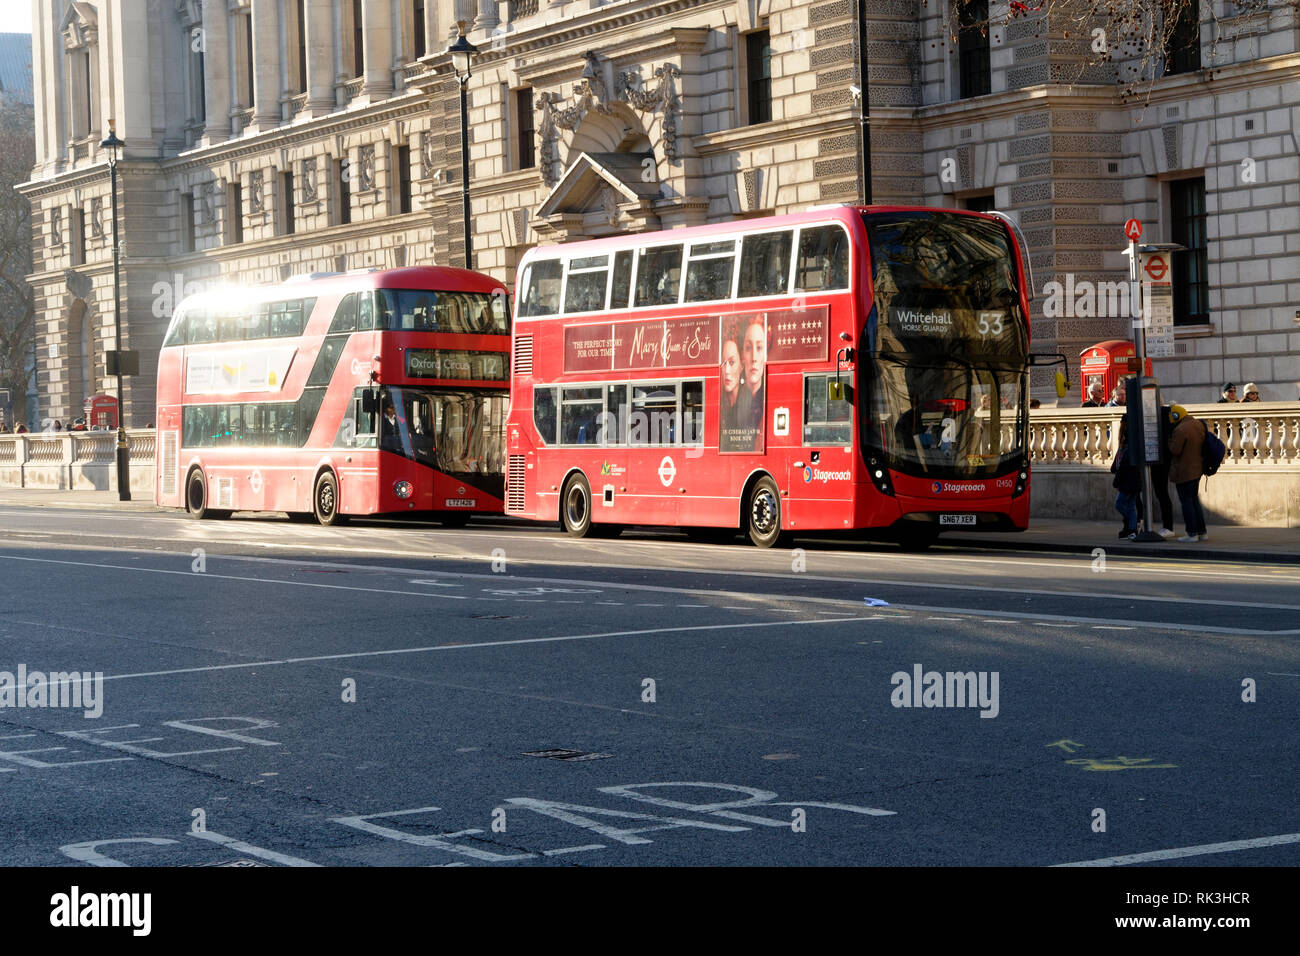 London busses at bus stop, London, United Kingdom. Stock Photo